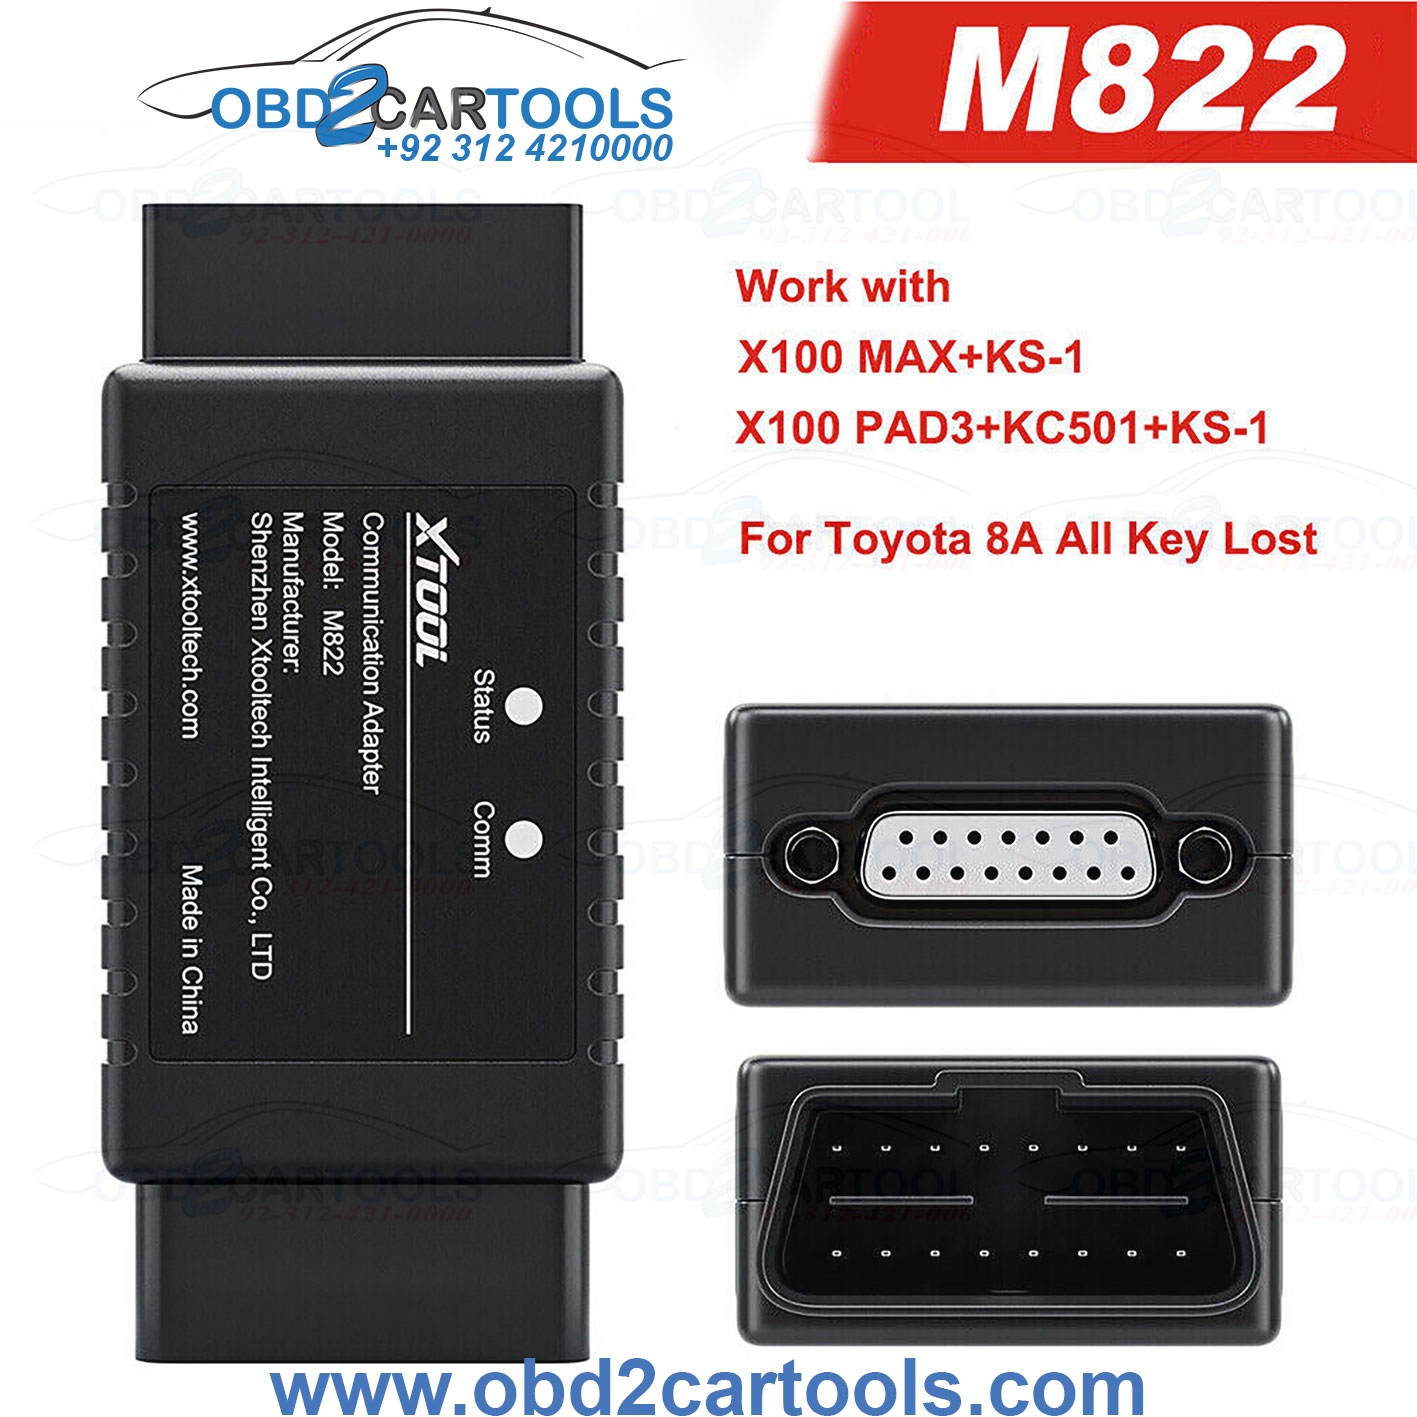 Product image for XTOOL M822 Smart Key Programming Adapter Connector For Toyota 8A All Key Lost